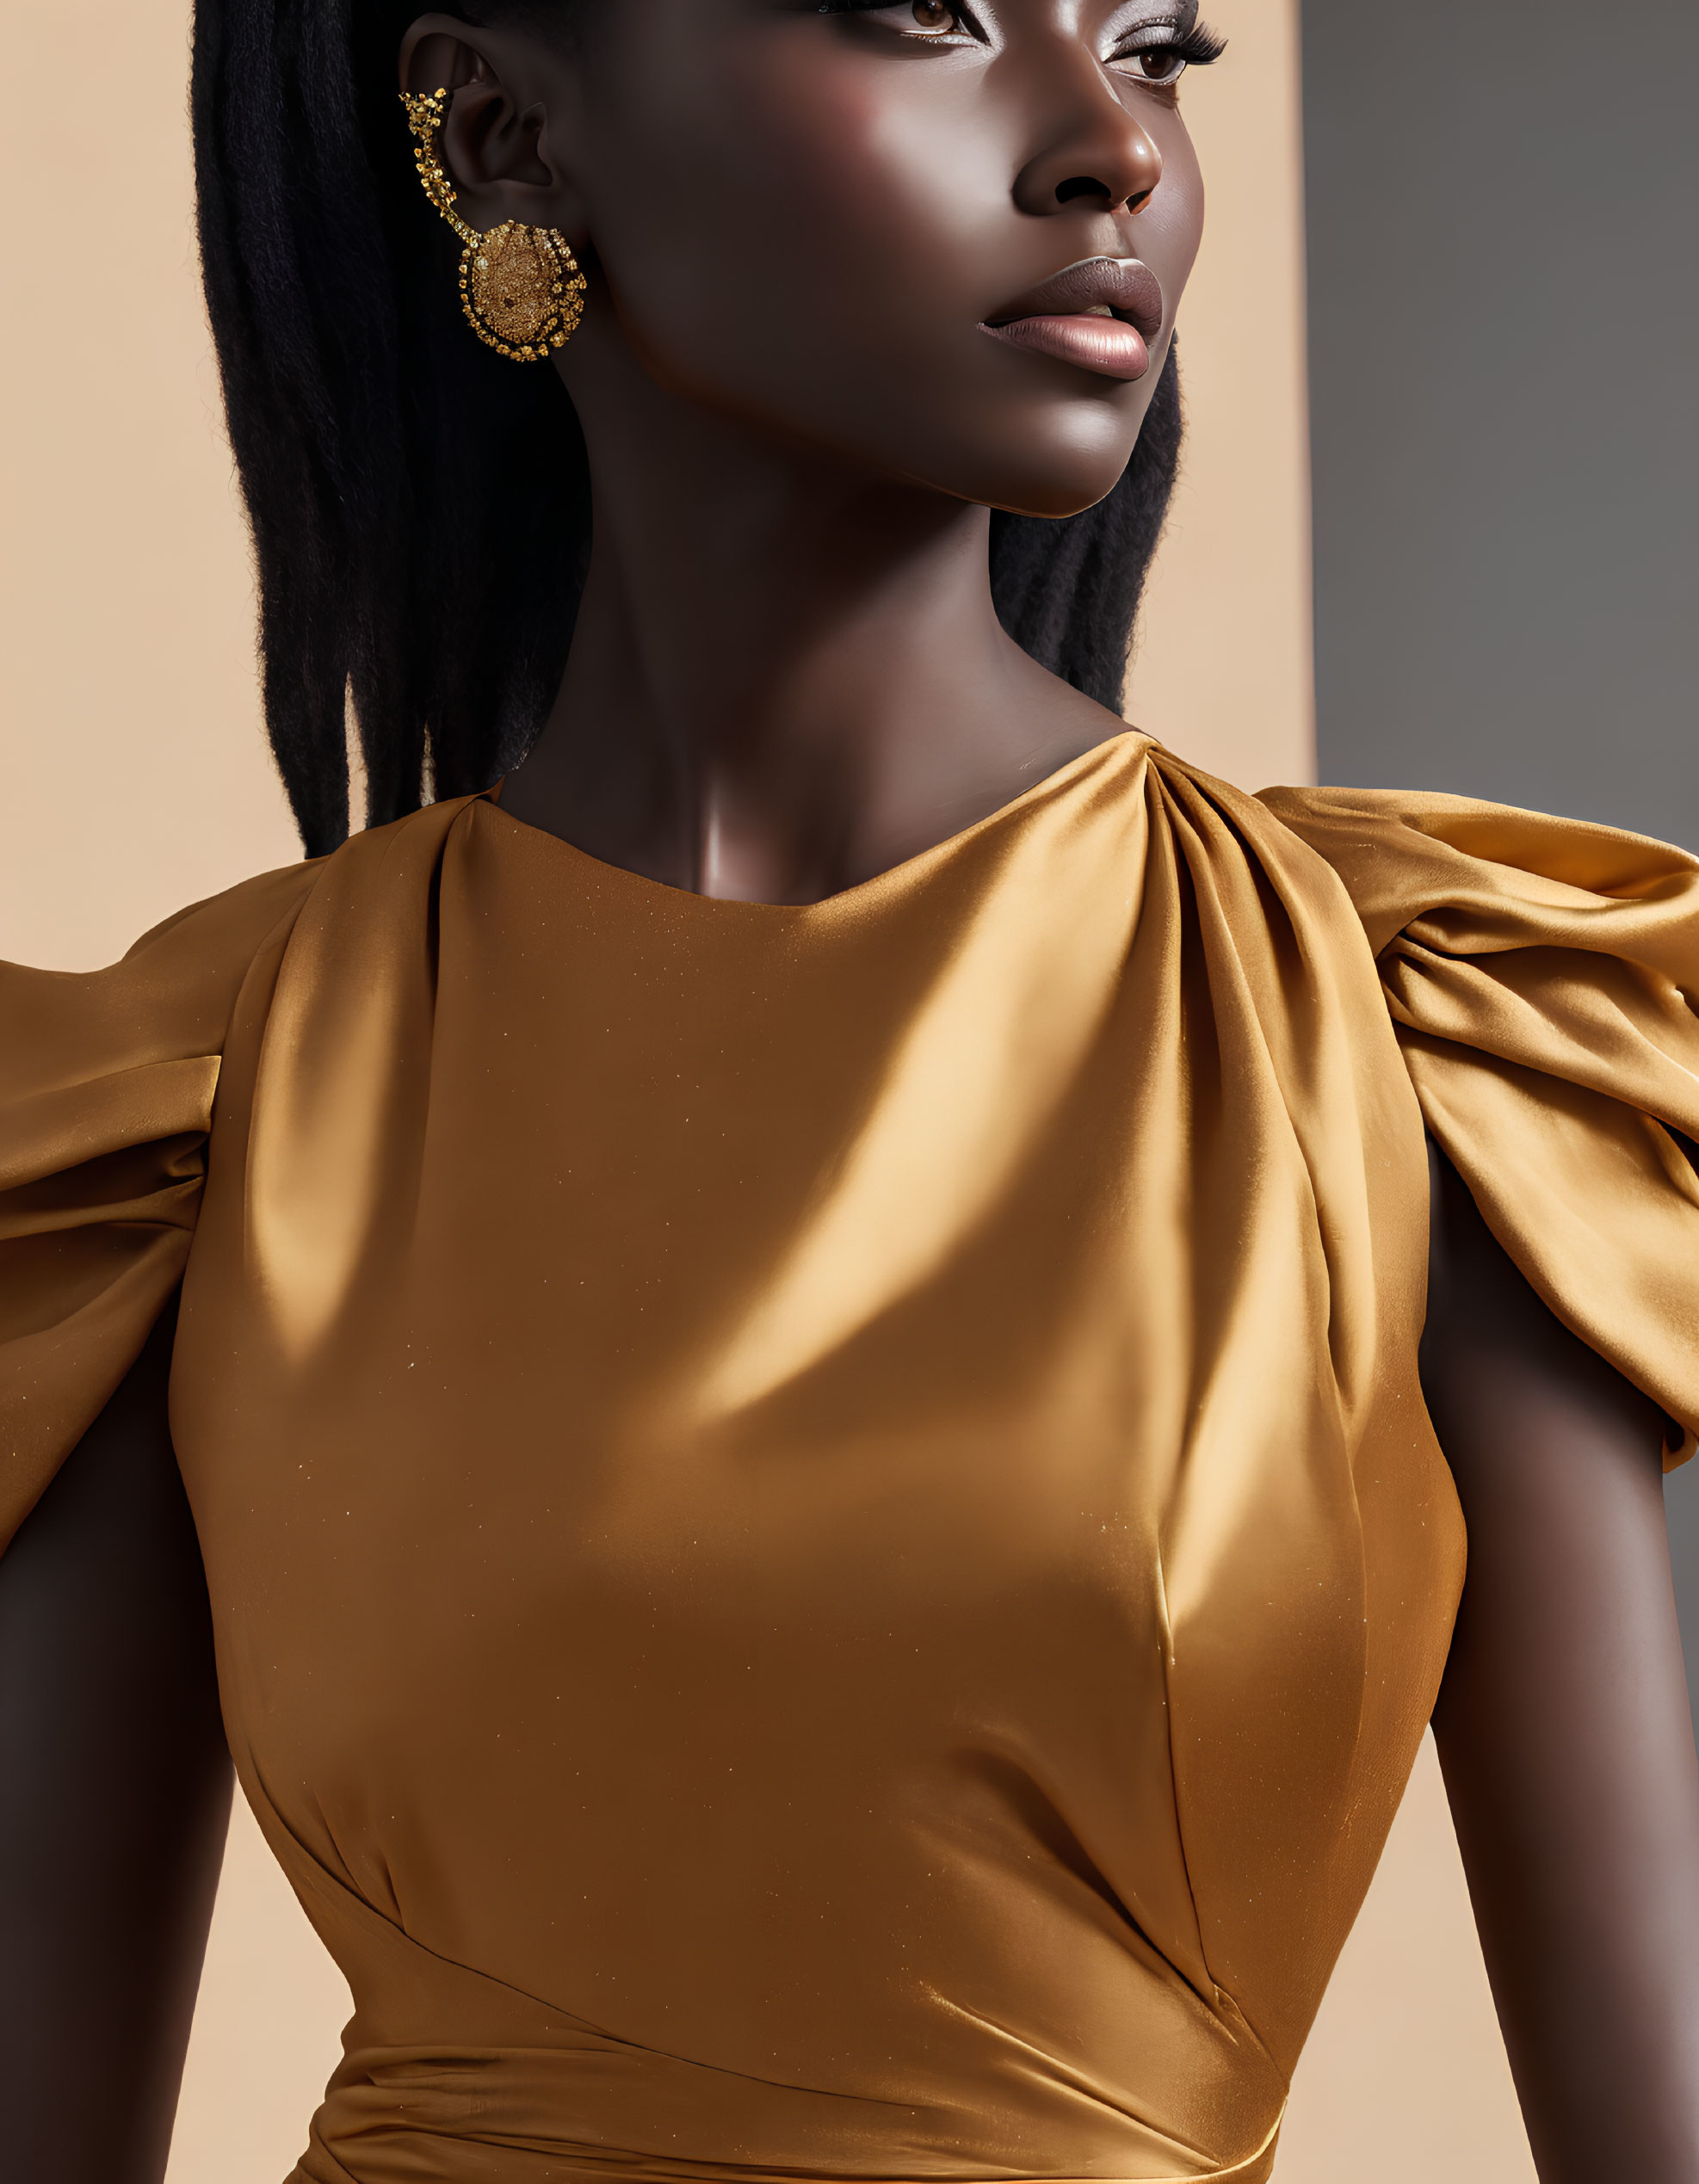 Dark-skinned woman in gold dress with statement earrings and sleek hair.